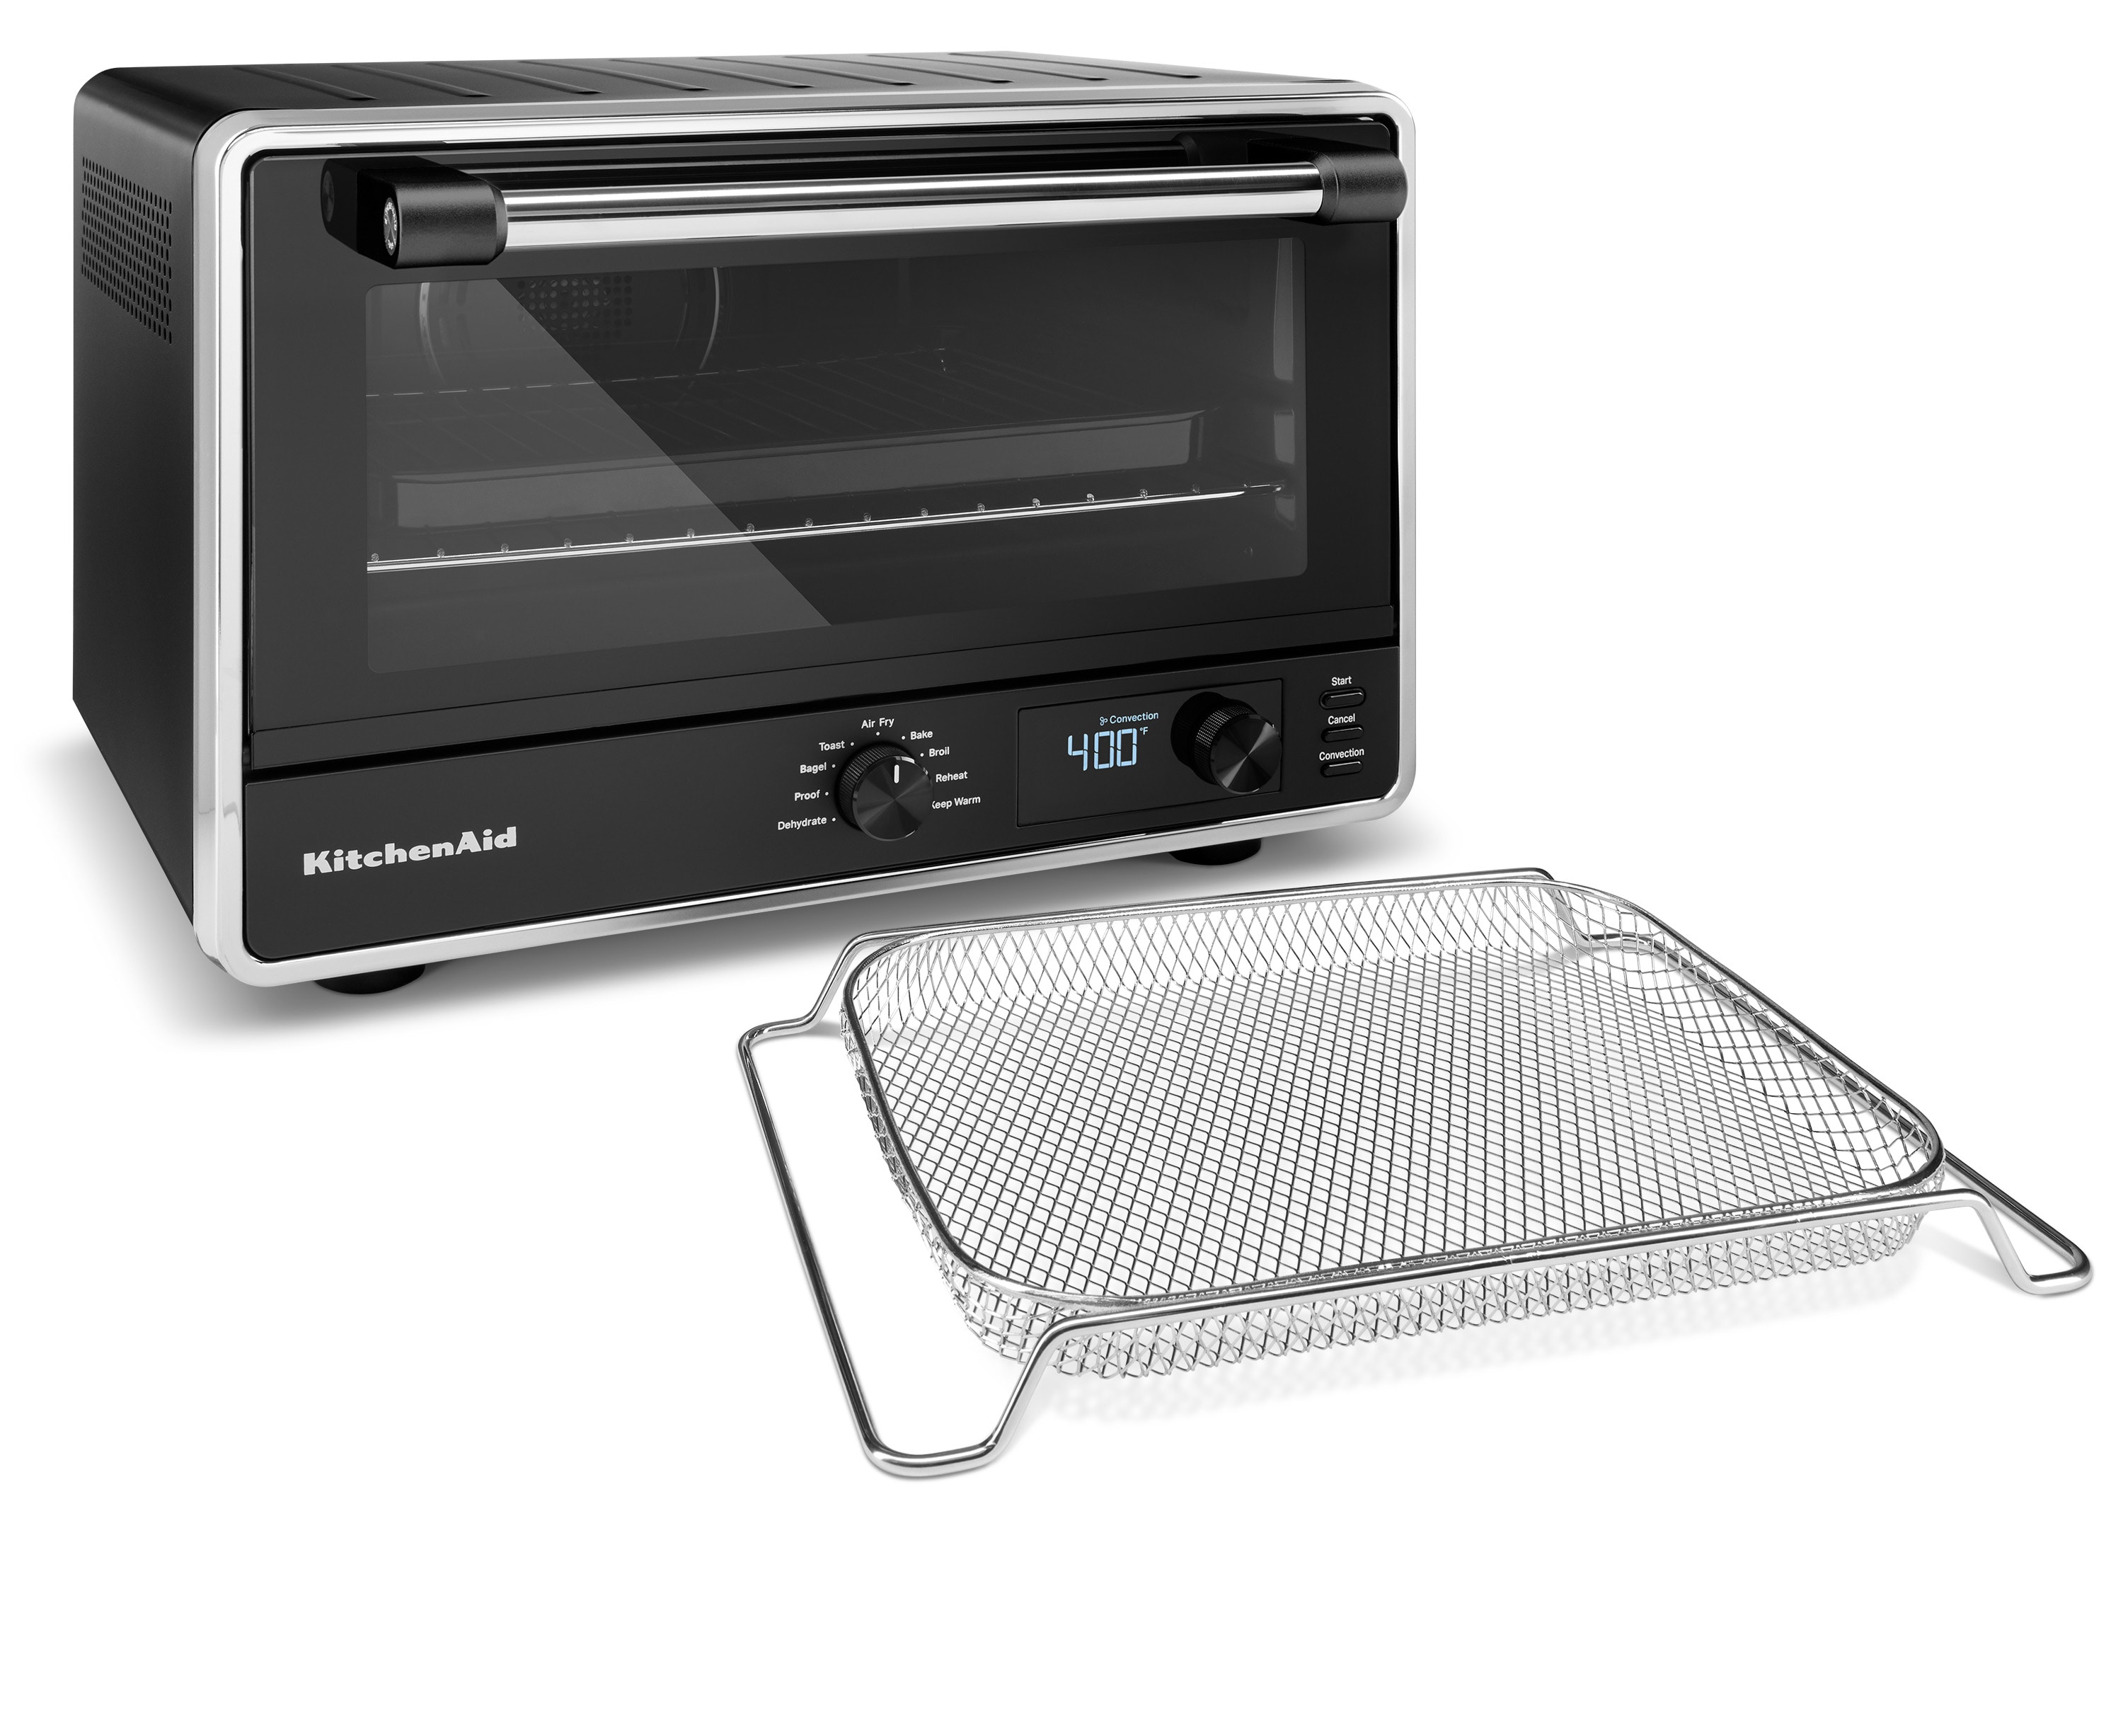 Performance Air Fry Convection Oven, Countertop Toaster Oven, Dark